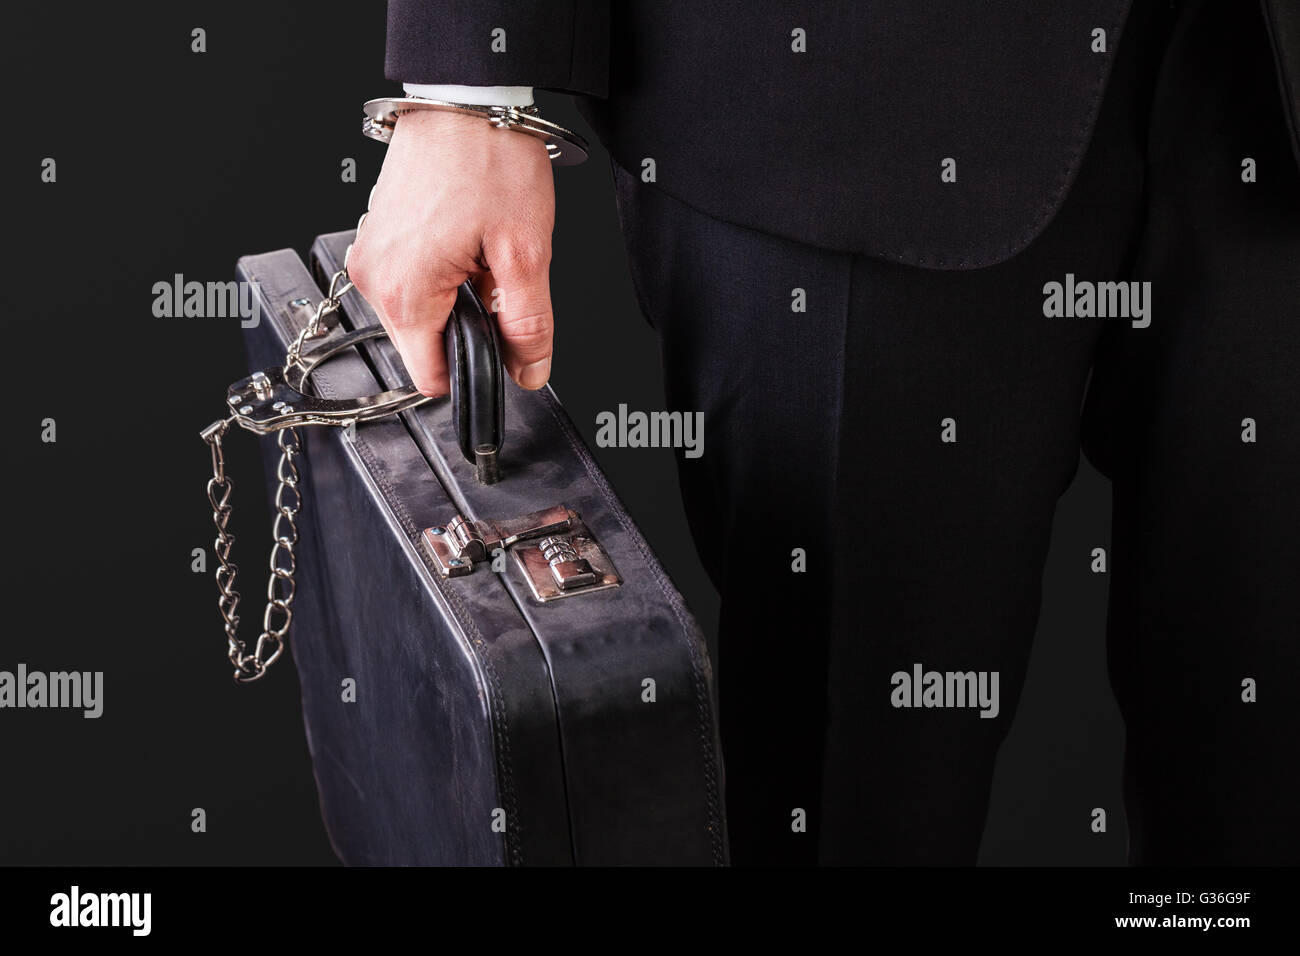 Businessman wearing a suit with a secure suitcase attached with handcuffs Stock Photo